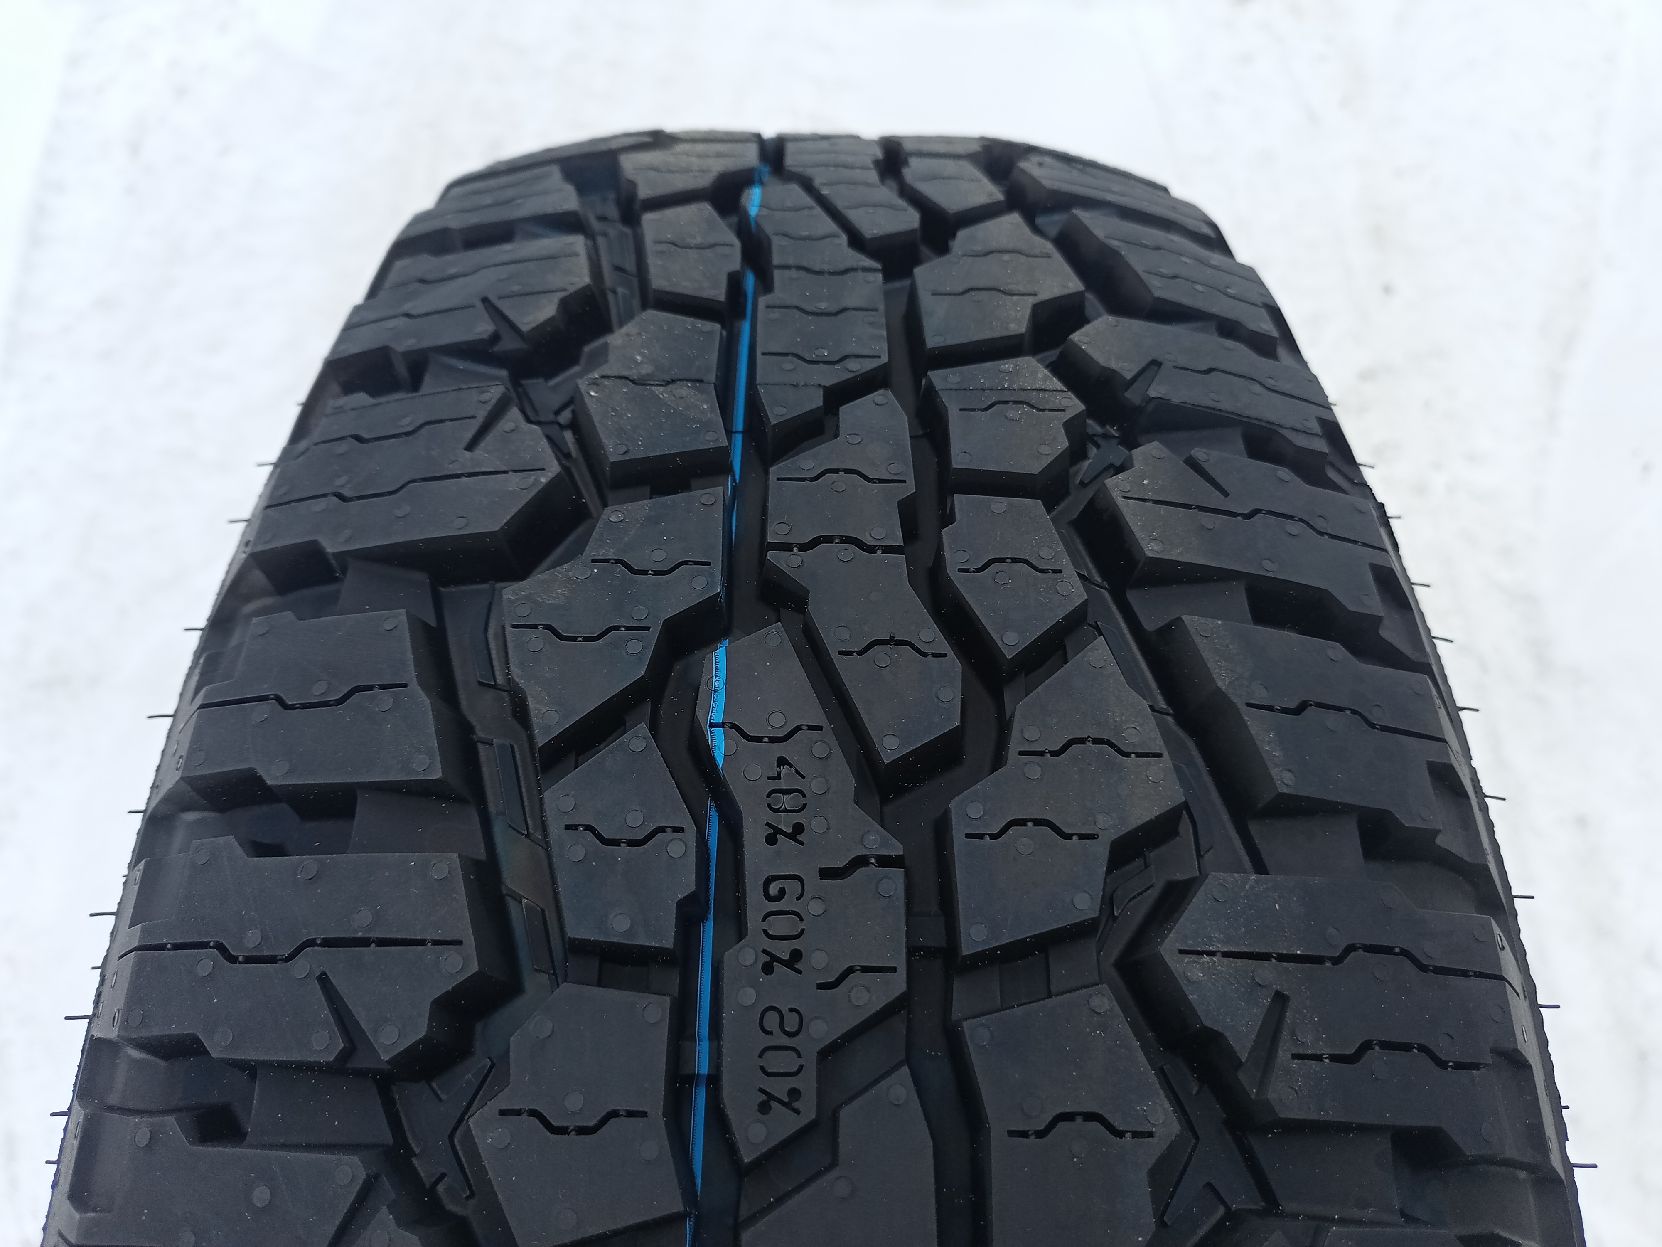 Купить летнюю 245 70 16. Нокиян МТ Р 16 215 70. Nokian Tyres Outpost at 215/65 r16. 215/65 R 16 98t Nokian Tyres Outpost at. Шина r16 245/70 Nexen Roadian at 4*4 107t (лето).